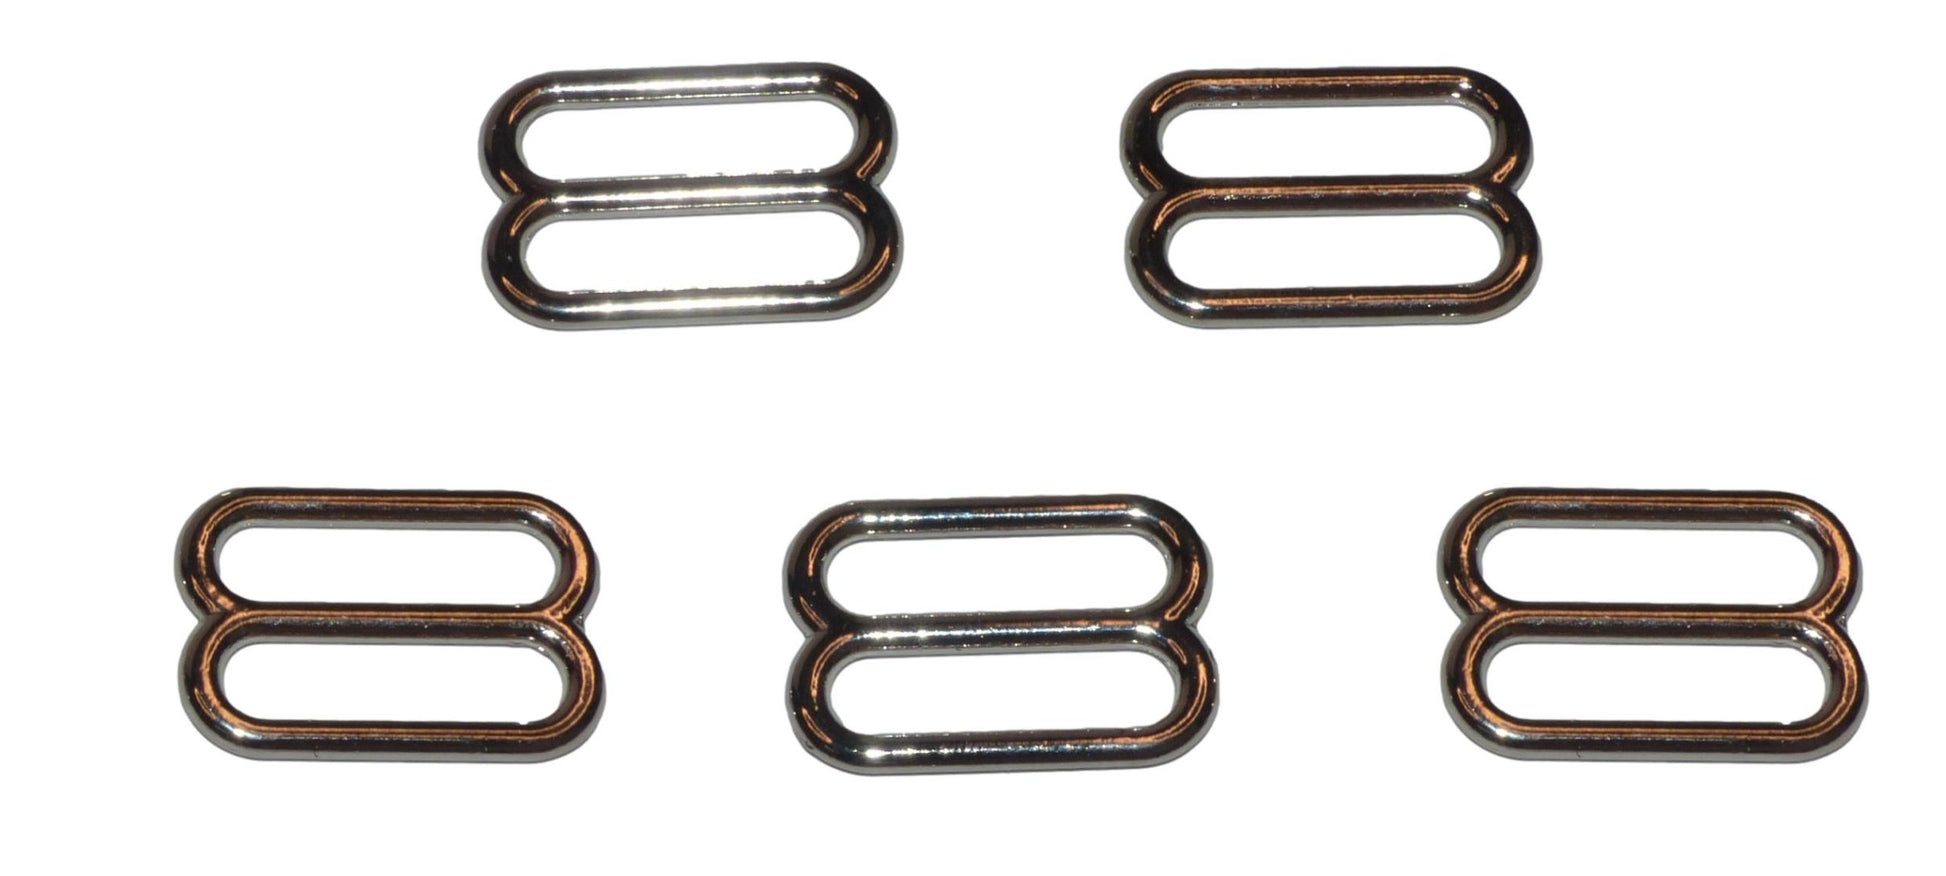 25mm rounded stainless steel triglide sliders, pack of 5